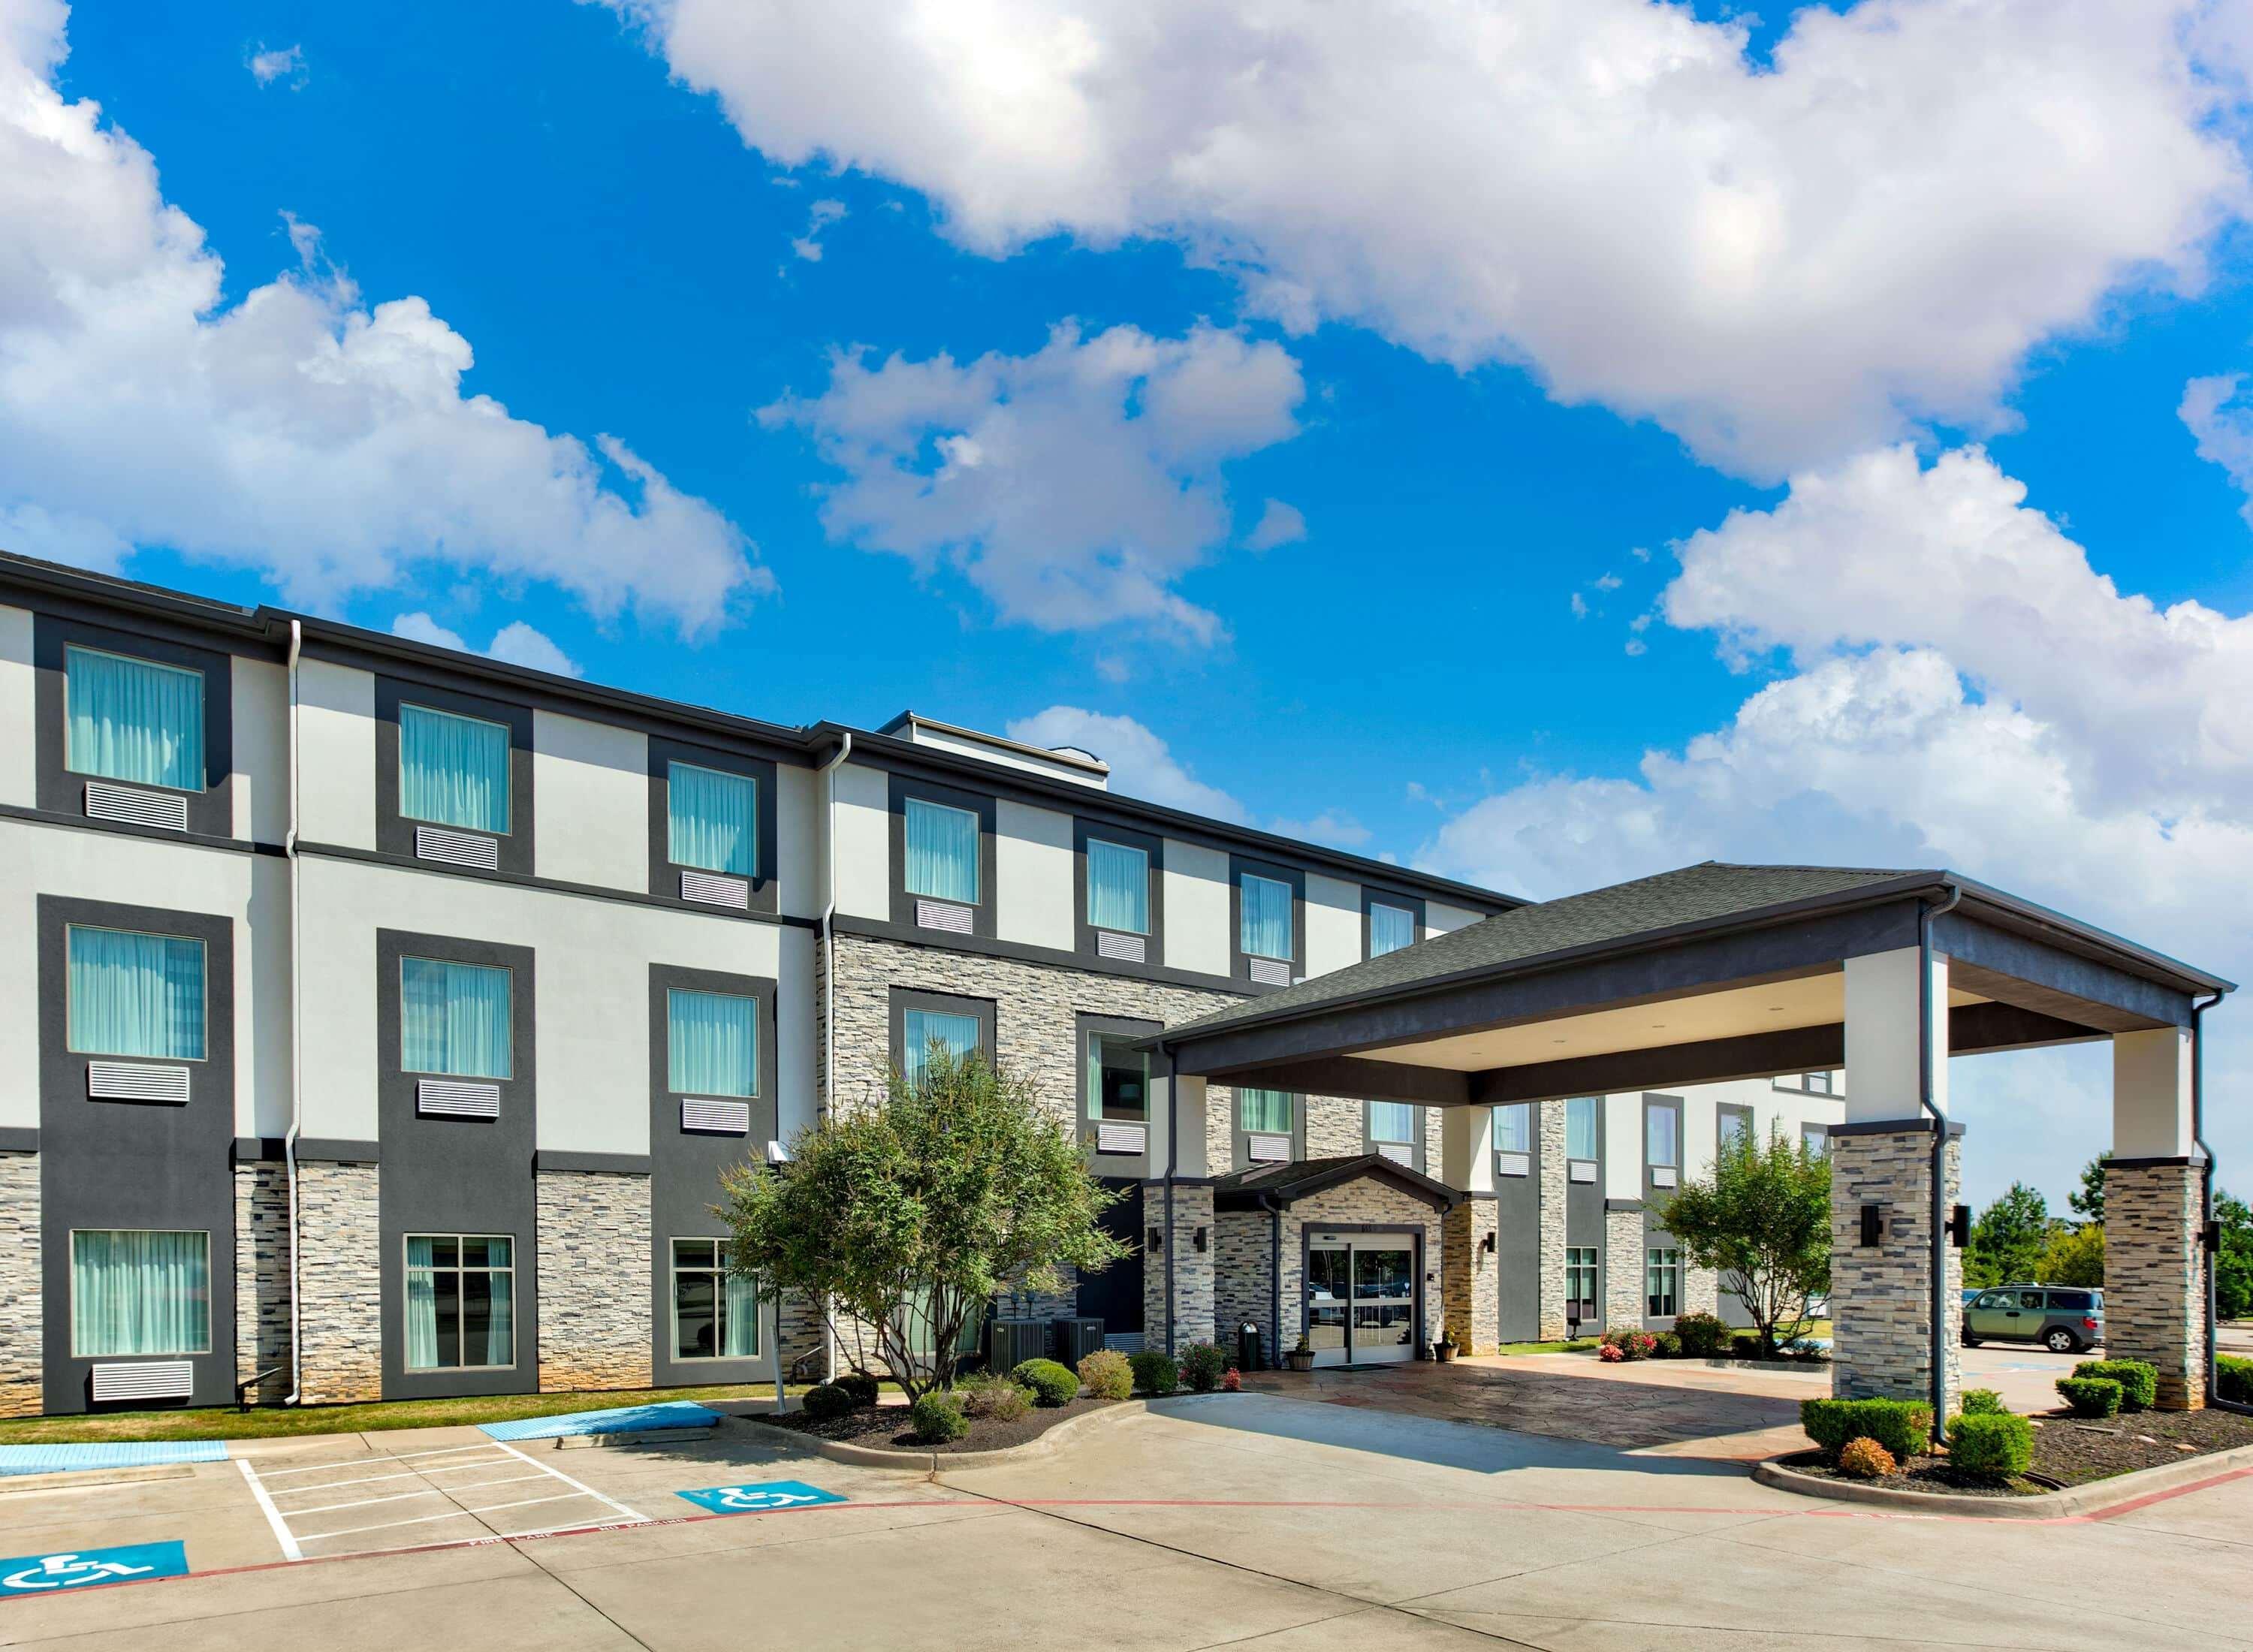 Wingate By Wyndham Longview North Hotel Exterior photo